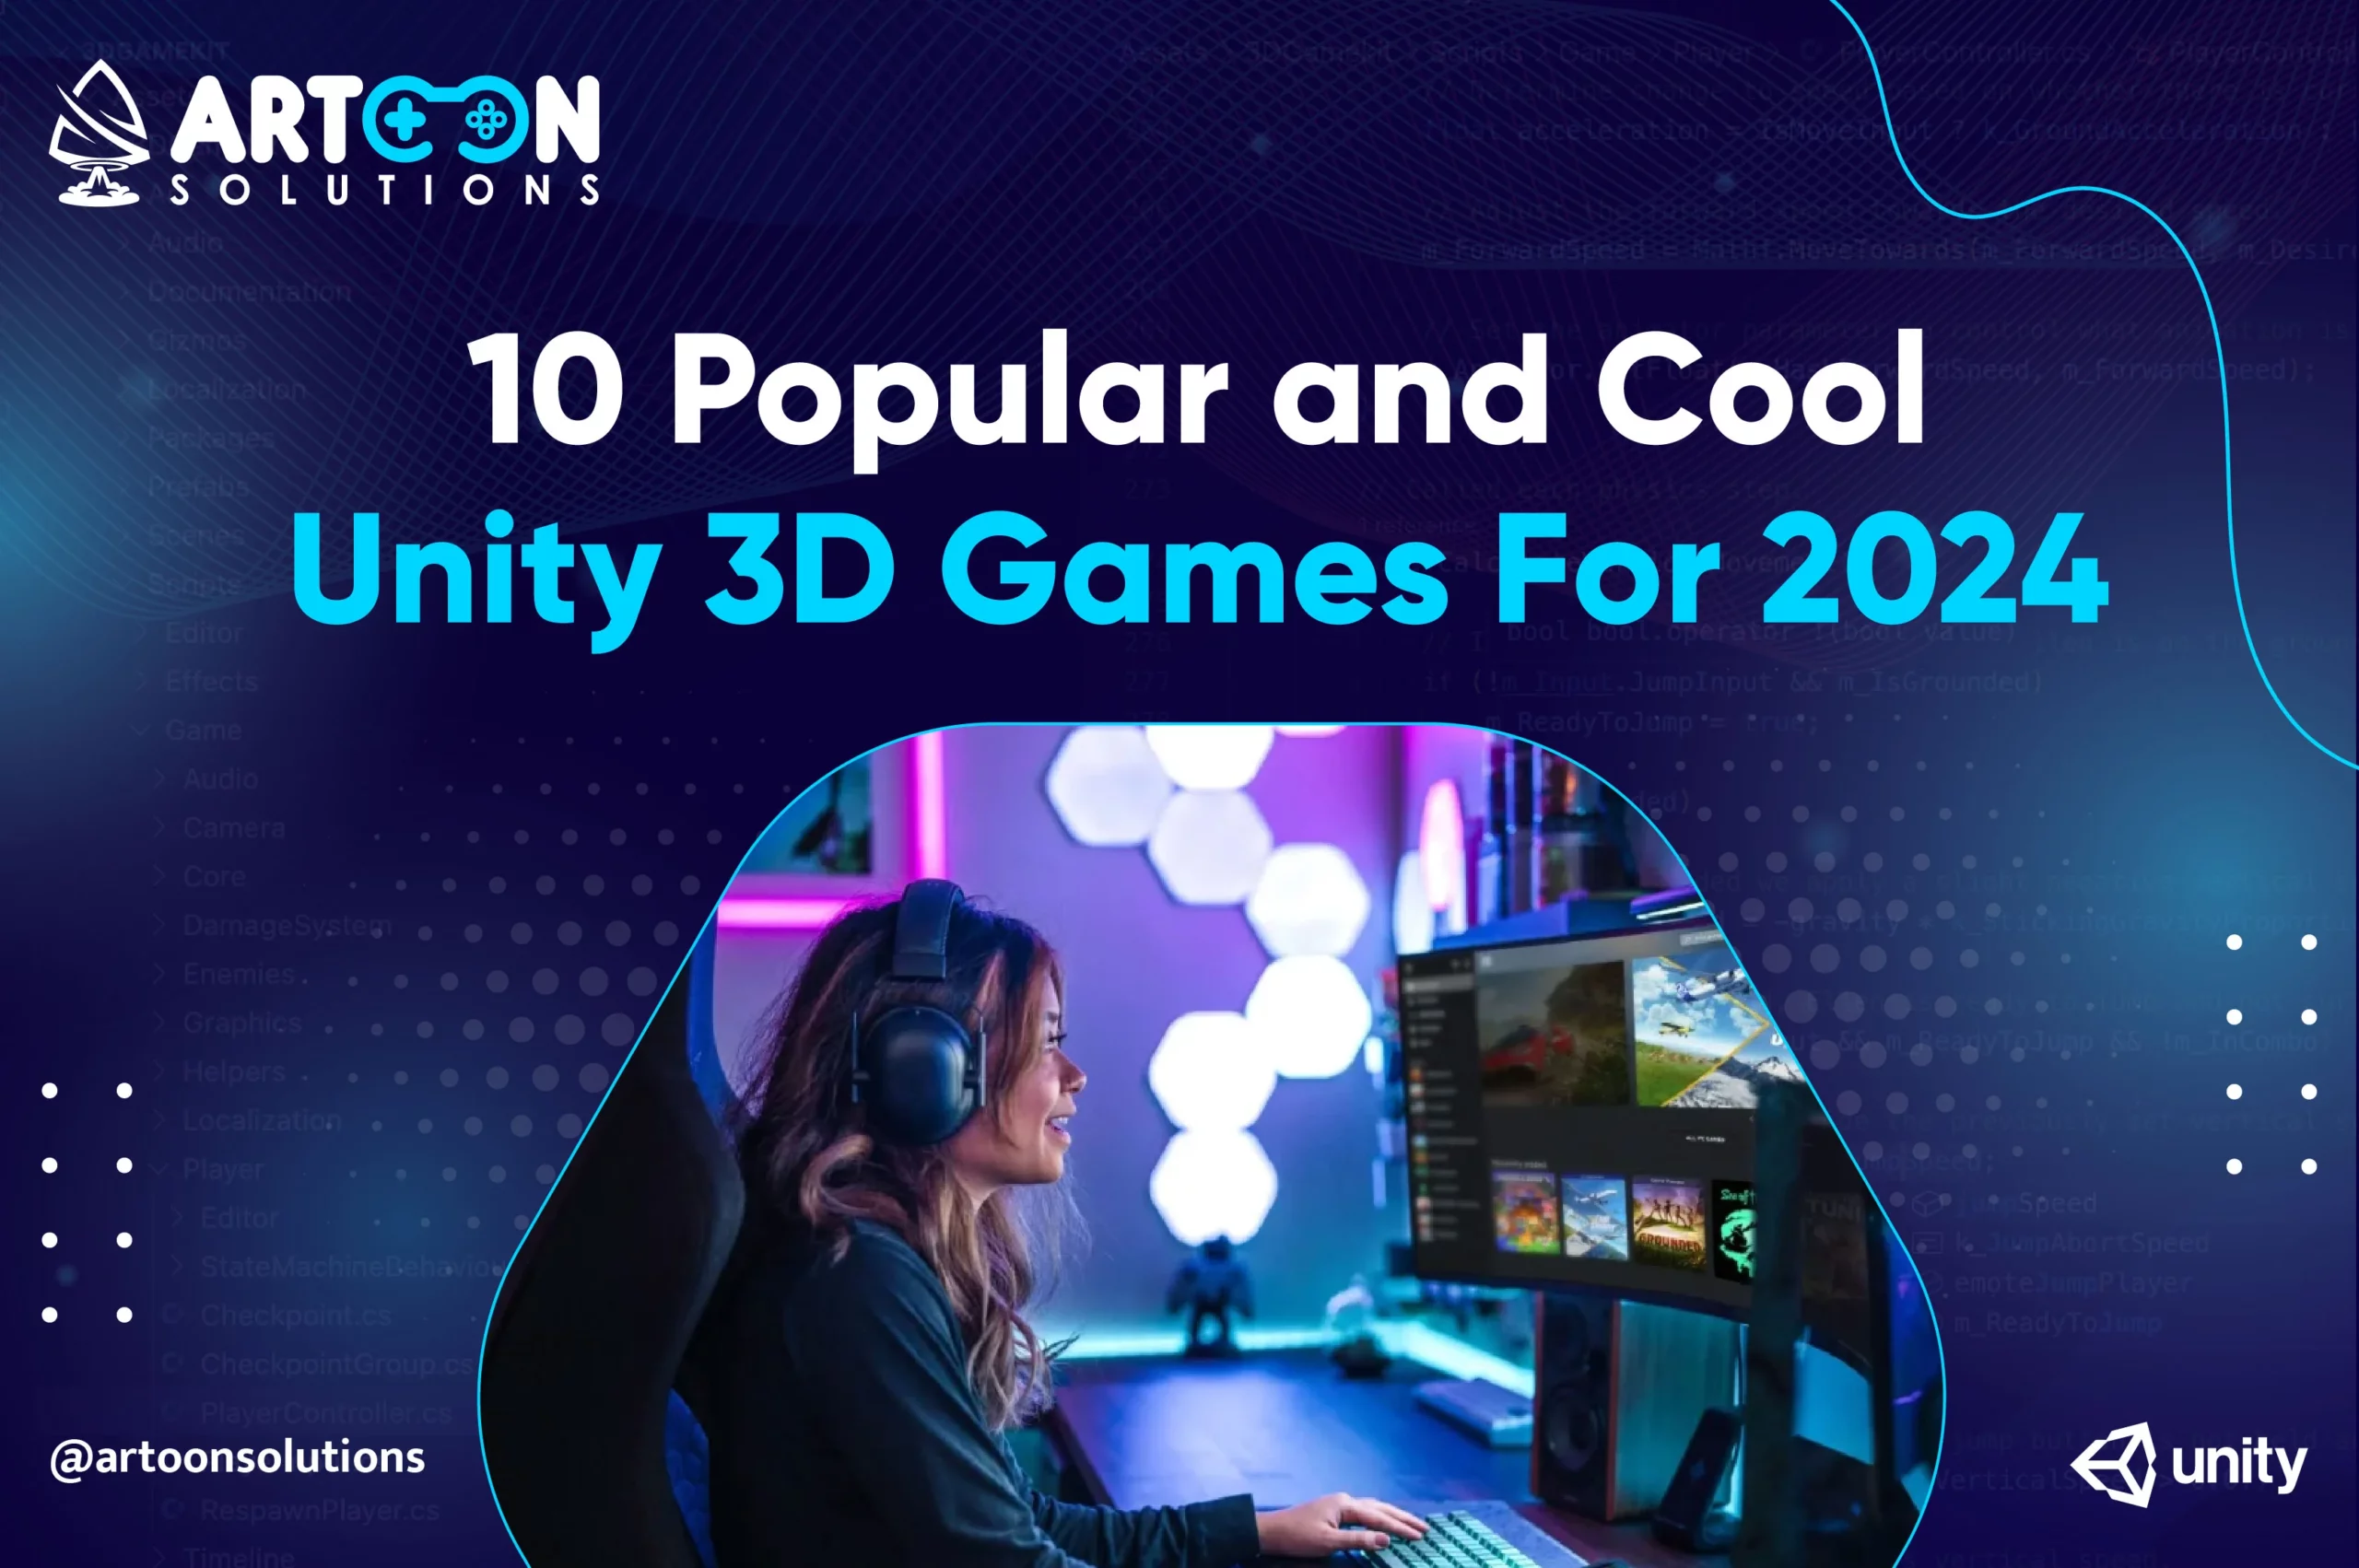 10 Popular and Cool Unity 3D Games For 2024